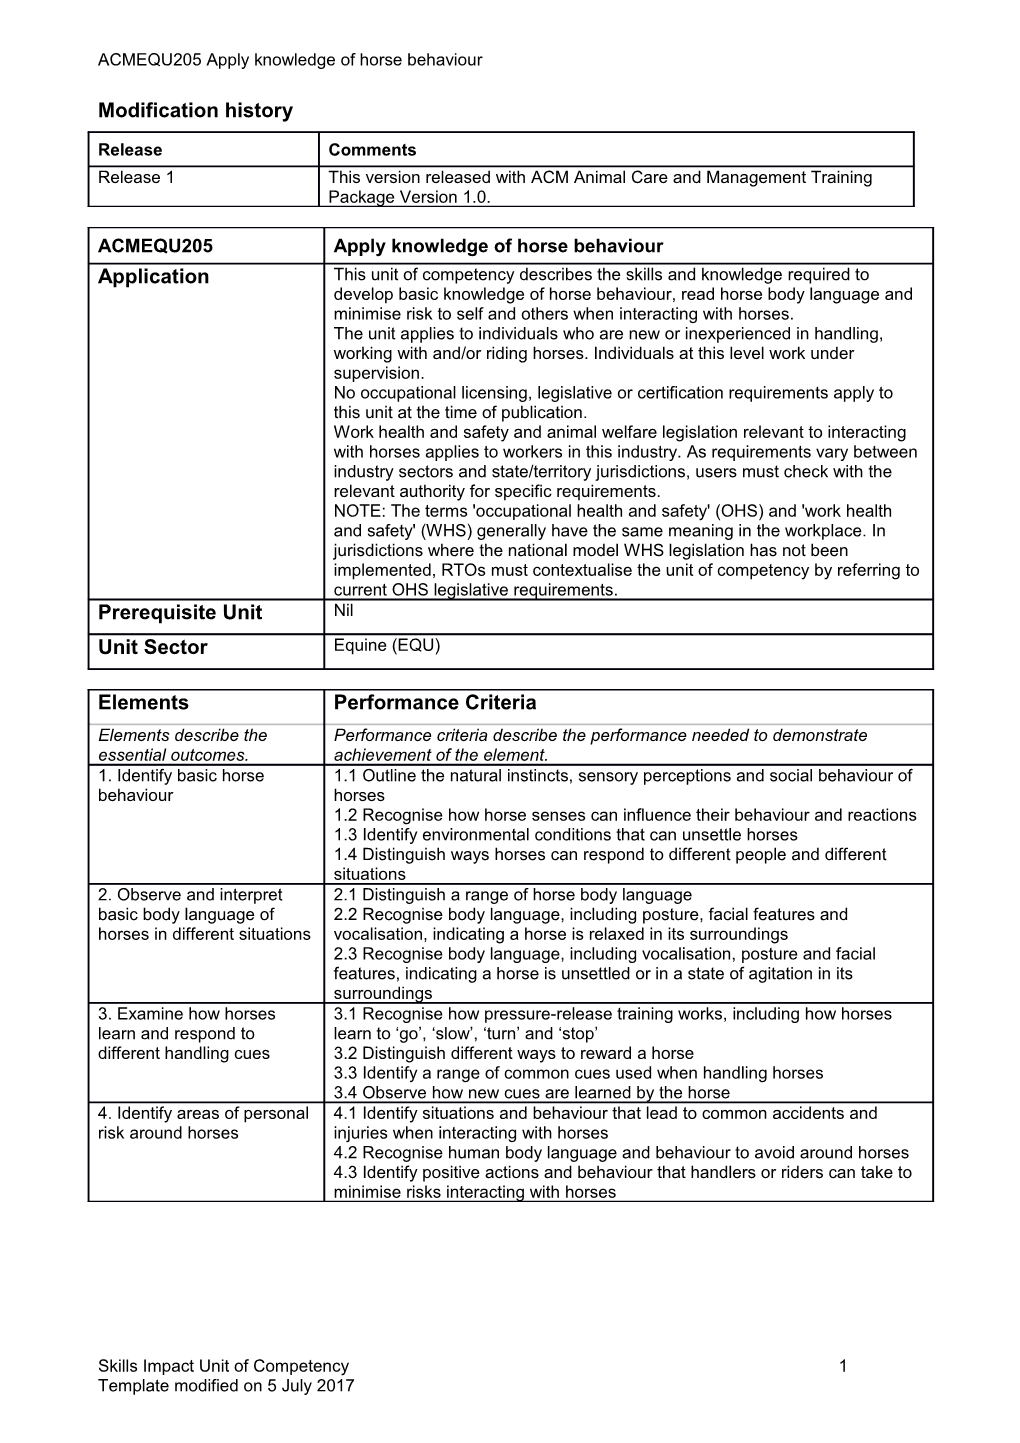 Skills Impact Unit of Competency Template s7